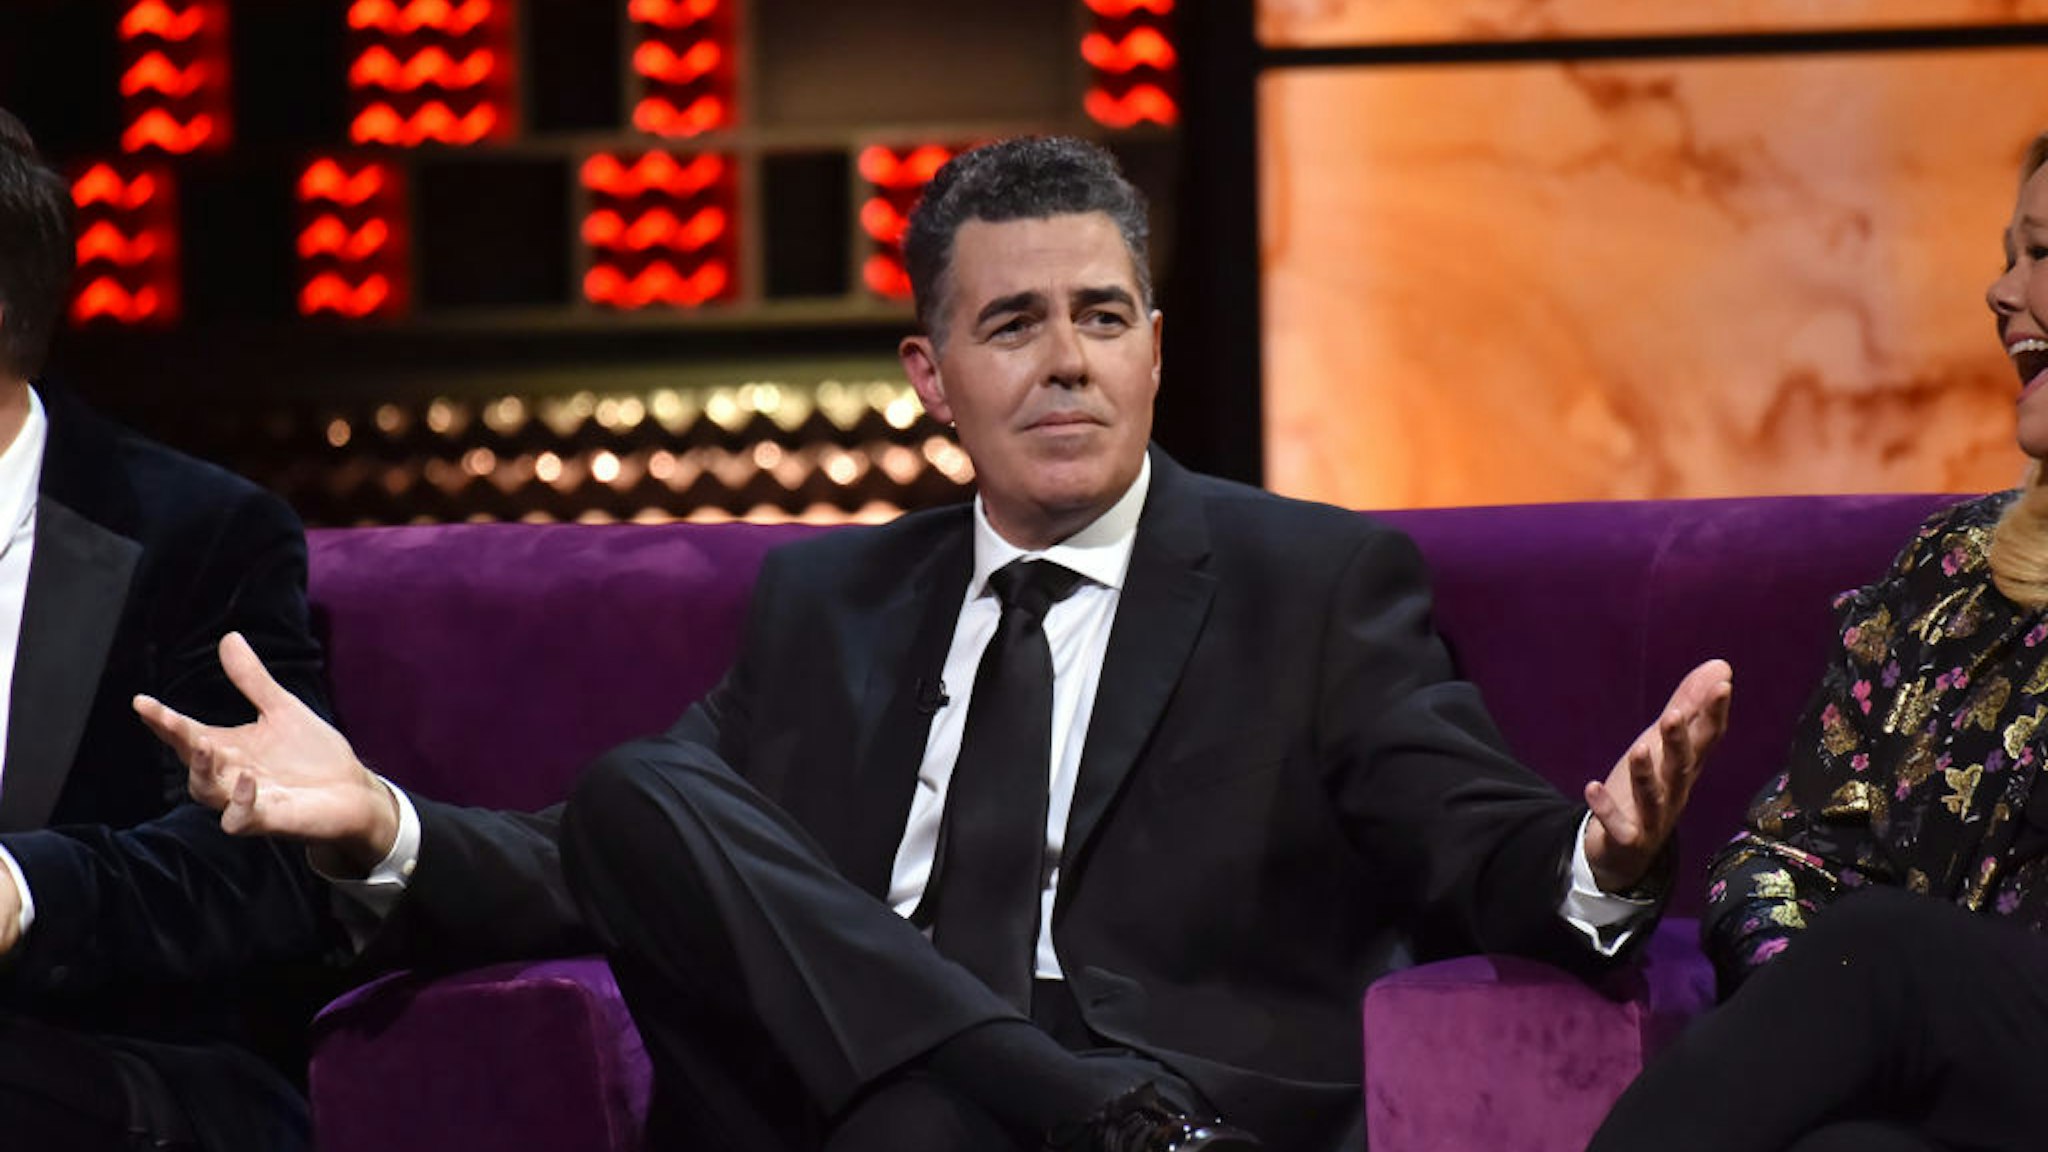 Adam Carolla attends the Comedy Central Roast of Alec Baldwin at Saban Theatre on September 07, 2019 in Beverly Hills, California.